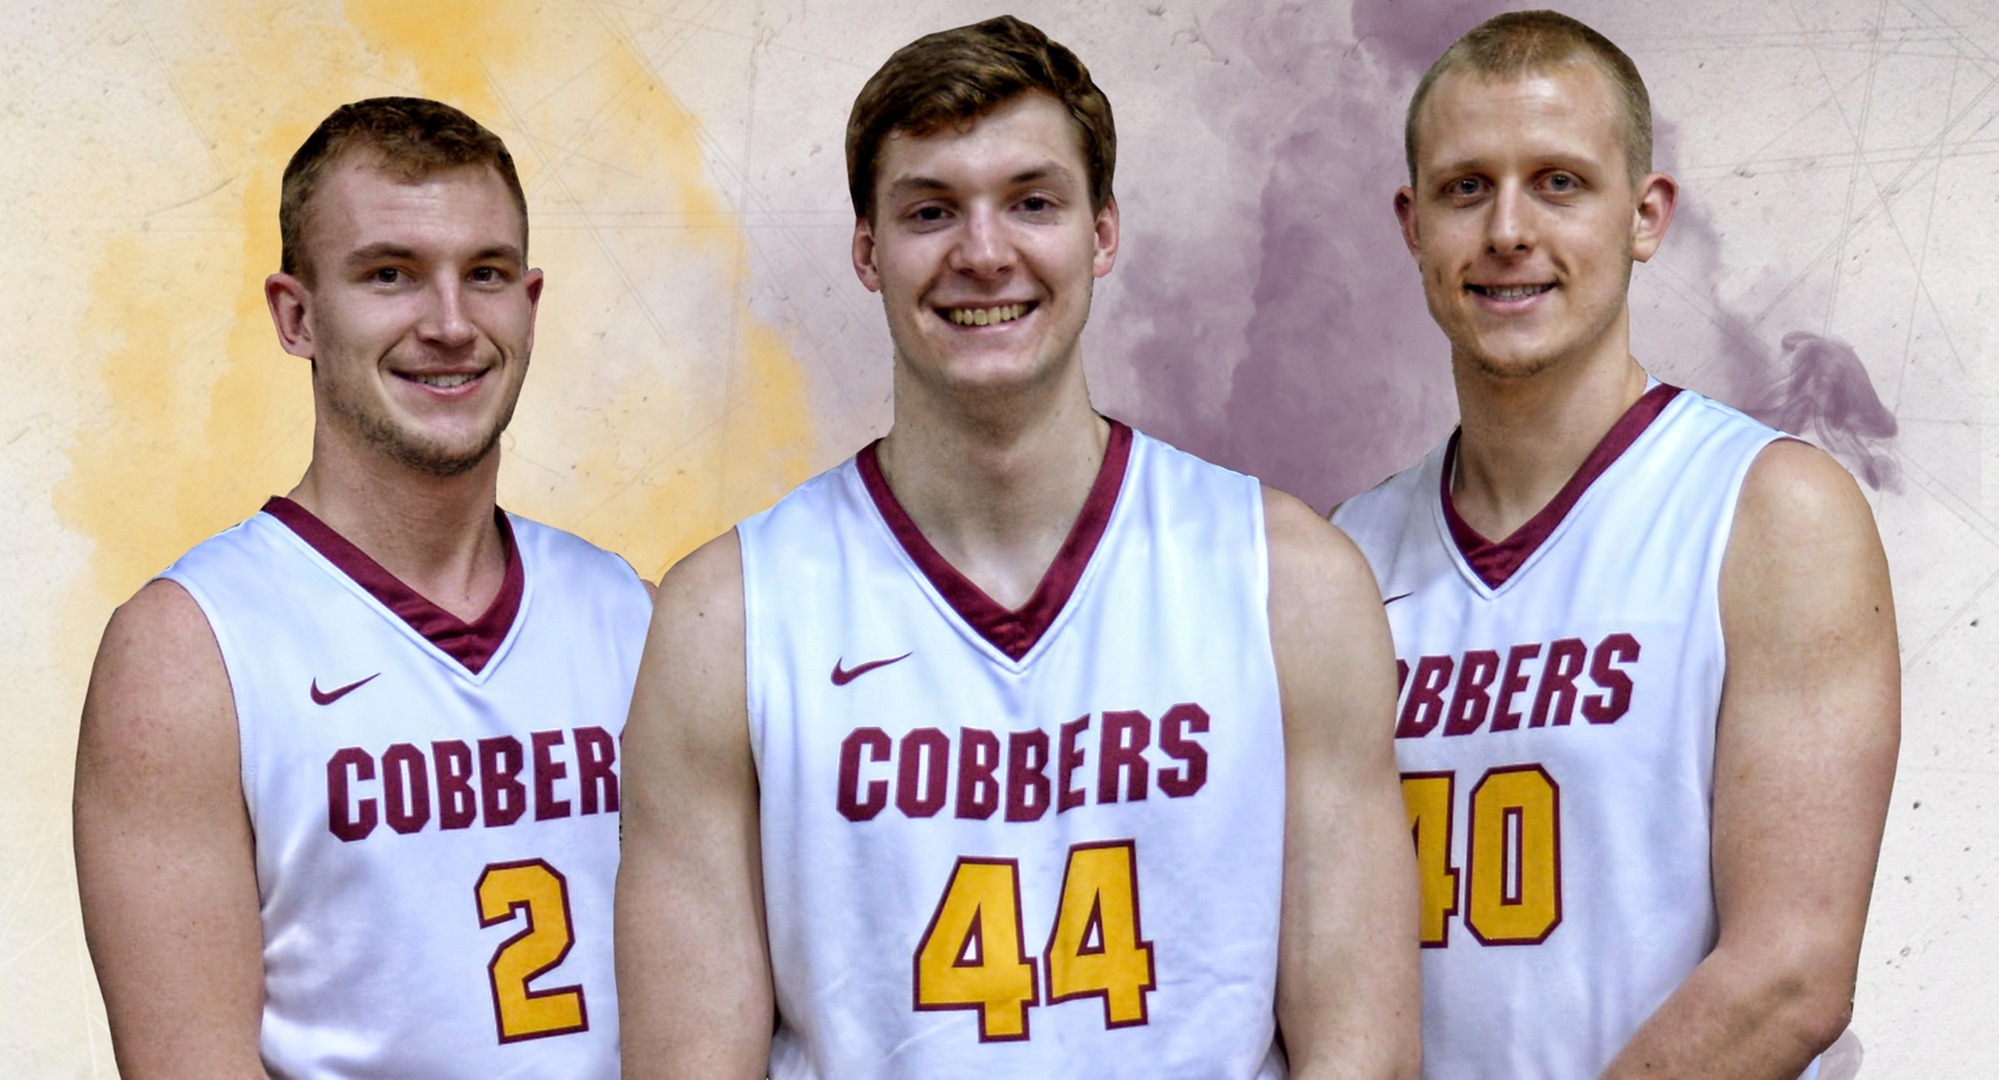 Cobber seniors (L-R) Austin Rund, Kevin Wolfe and Austin Heins were honored before the team's season finale with St. Olaf.